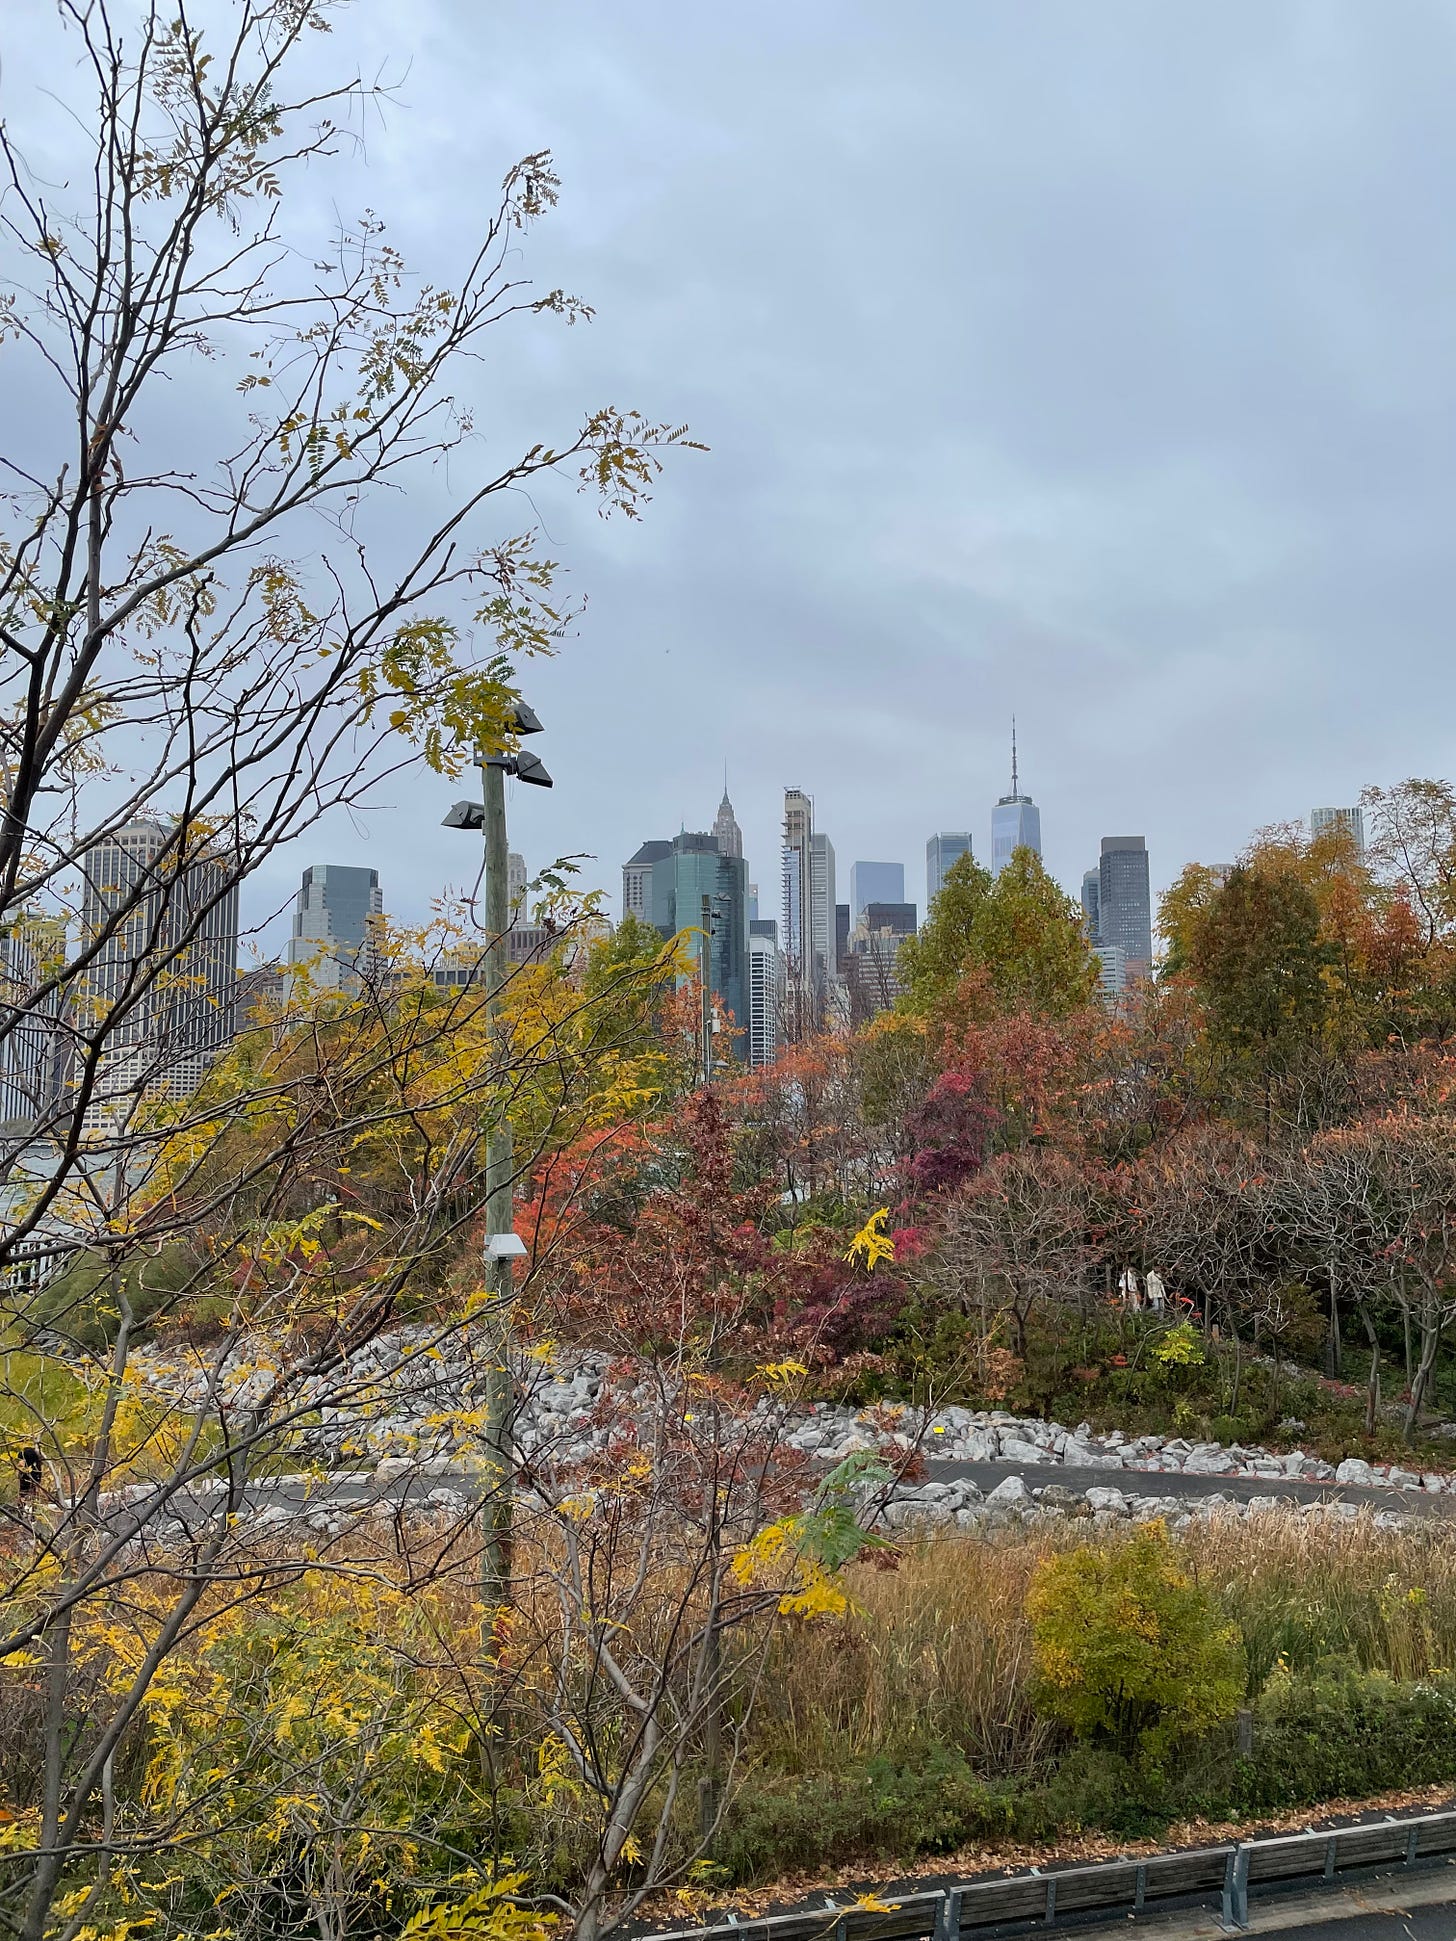 The New York City skyline on a grey fall day. In the foreground, trees of multiple colors can be seen; their leaves changing color.